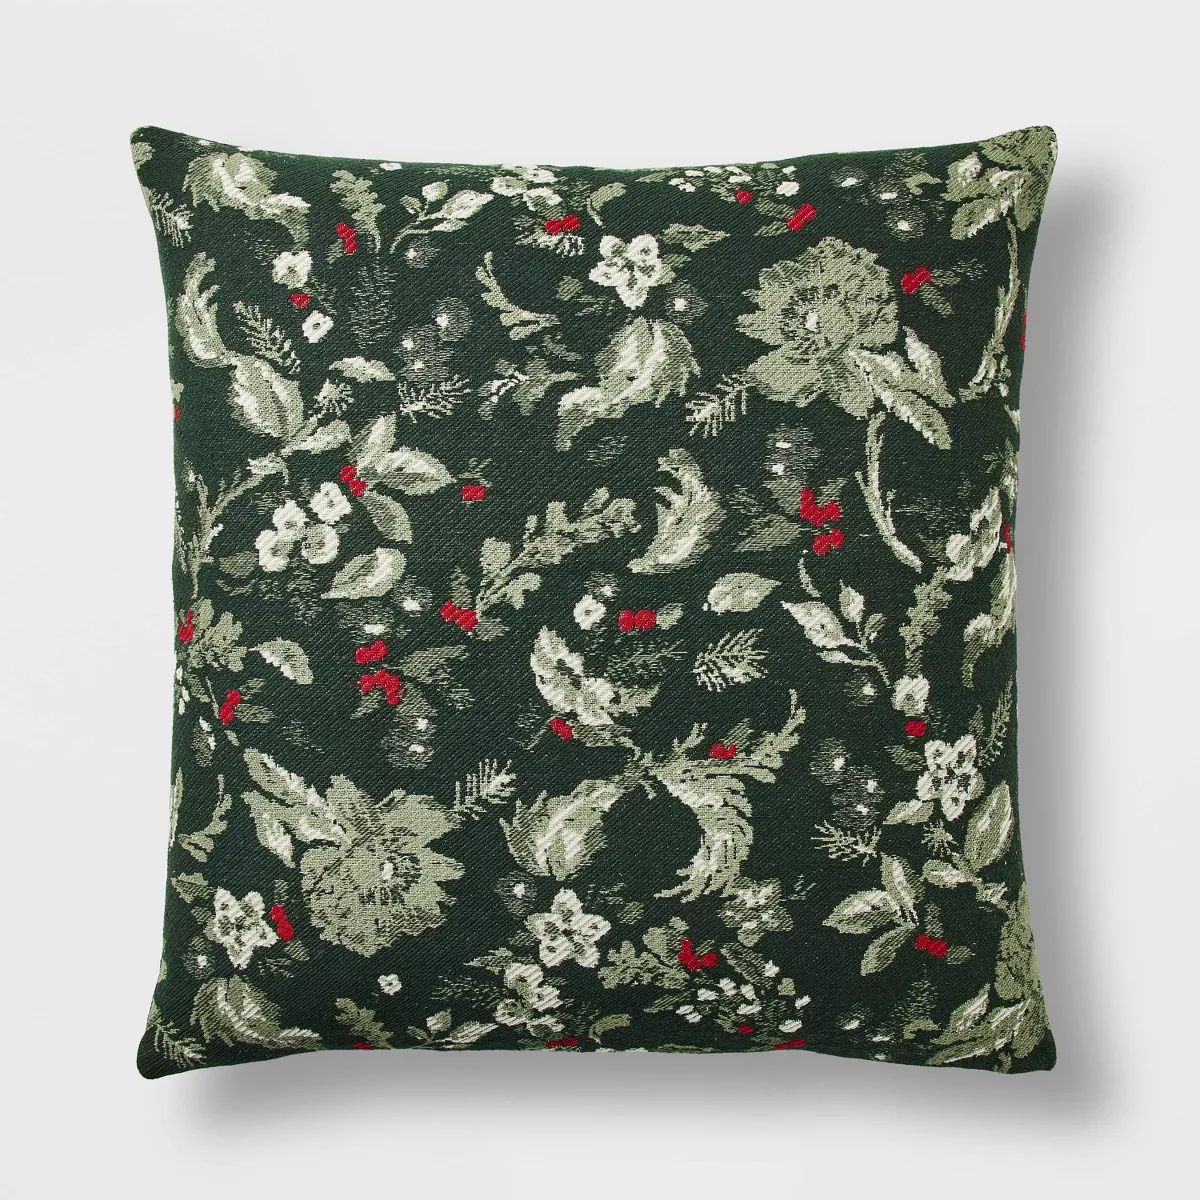 Oversized Printed Floral Throw Pillow - Threshold™ designed with Studio McGee | Target